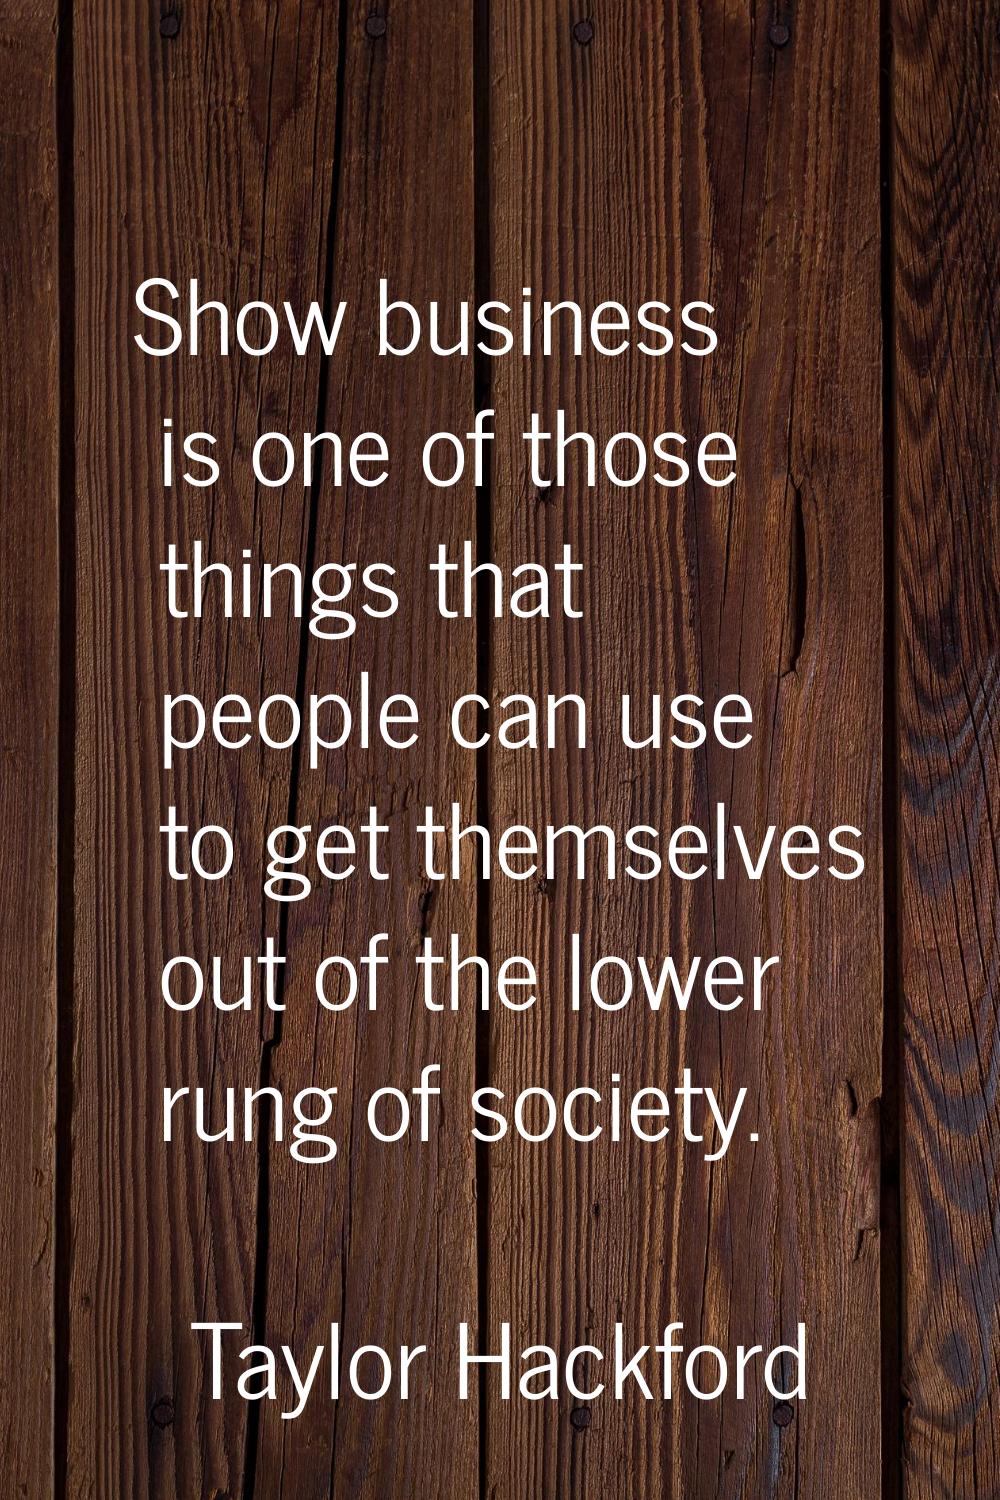 Show business is one of those things that people can use to get themselves out of the lower rung of